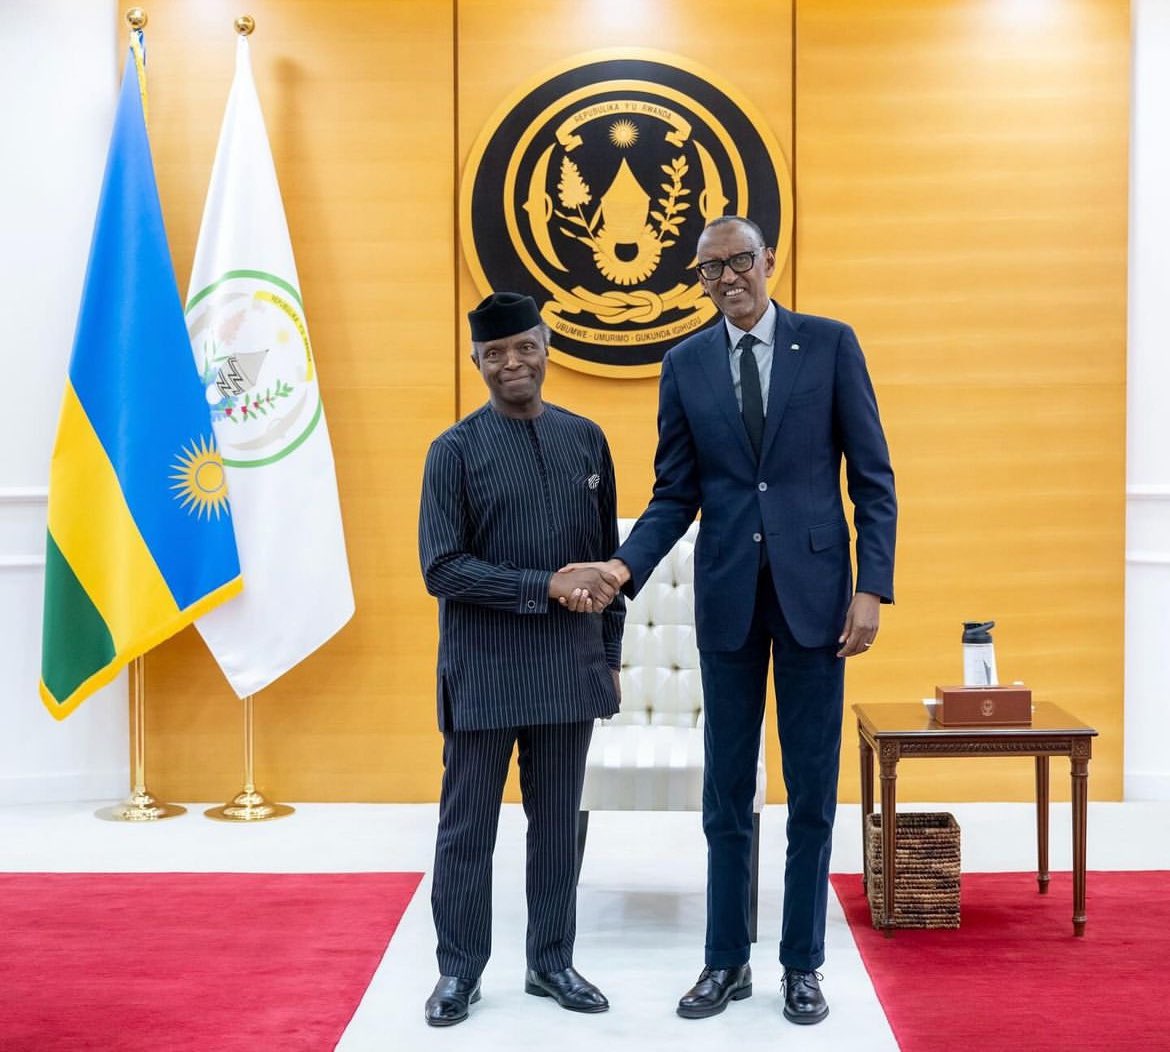 Earlier today, Former Vice President @ProfOsinbajo met with @PaulKagame, the President of Rwanda to discuss about the Timbuktoo Africa Innovation Fund, an initiative that aims to invest $1 billion over 10 years into 1000 tech startups across Africa.